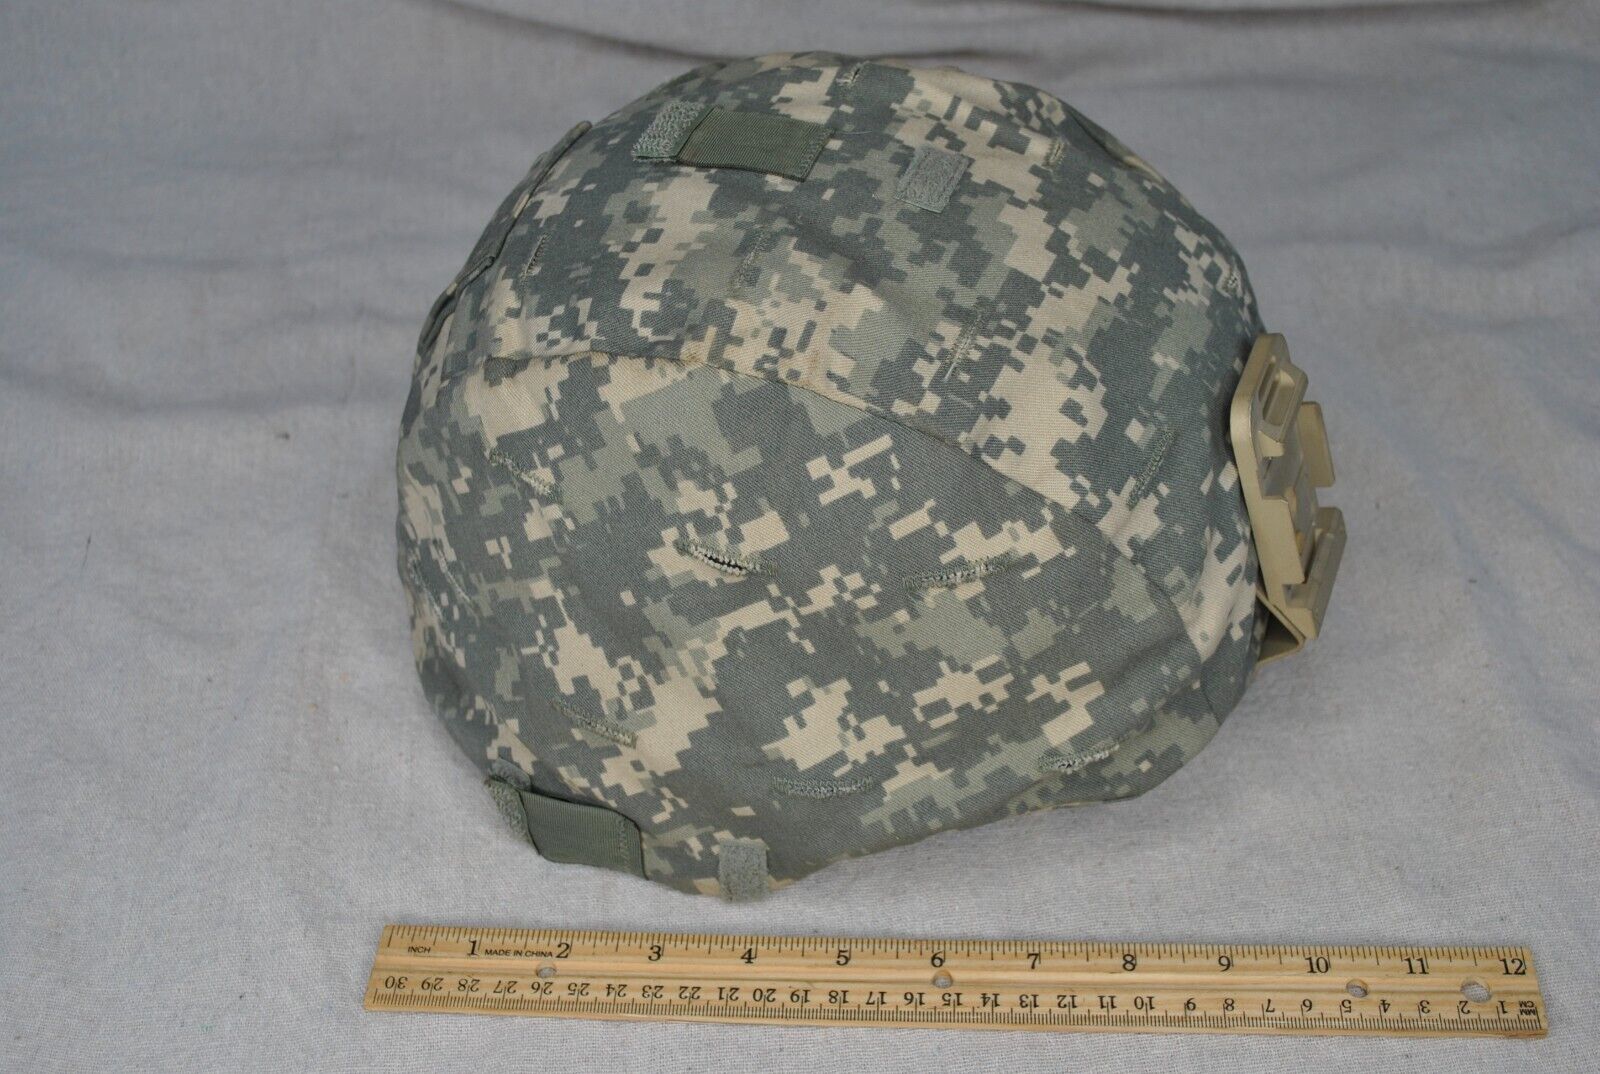 msa US Military helmet size large with camouflage cover